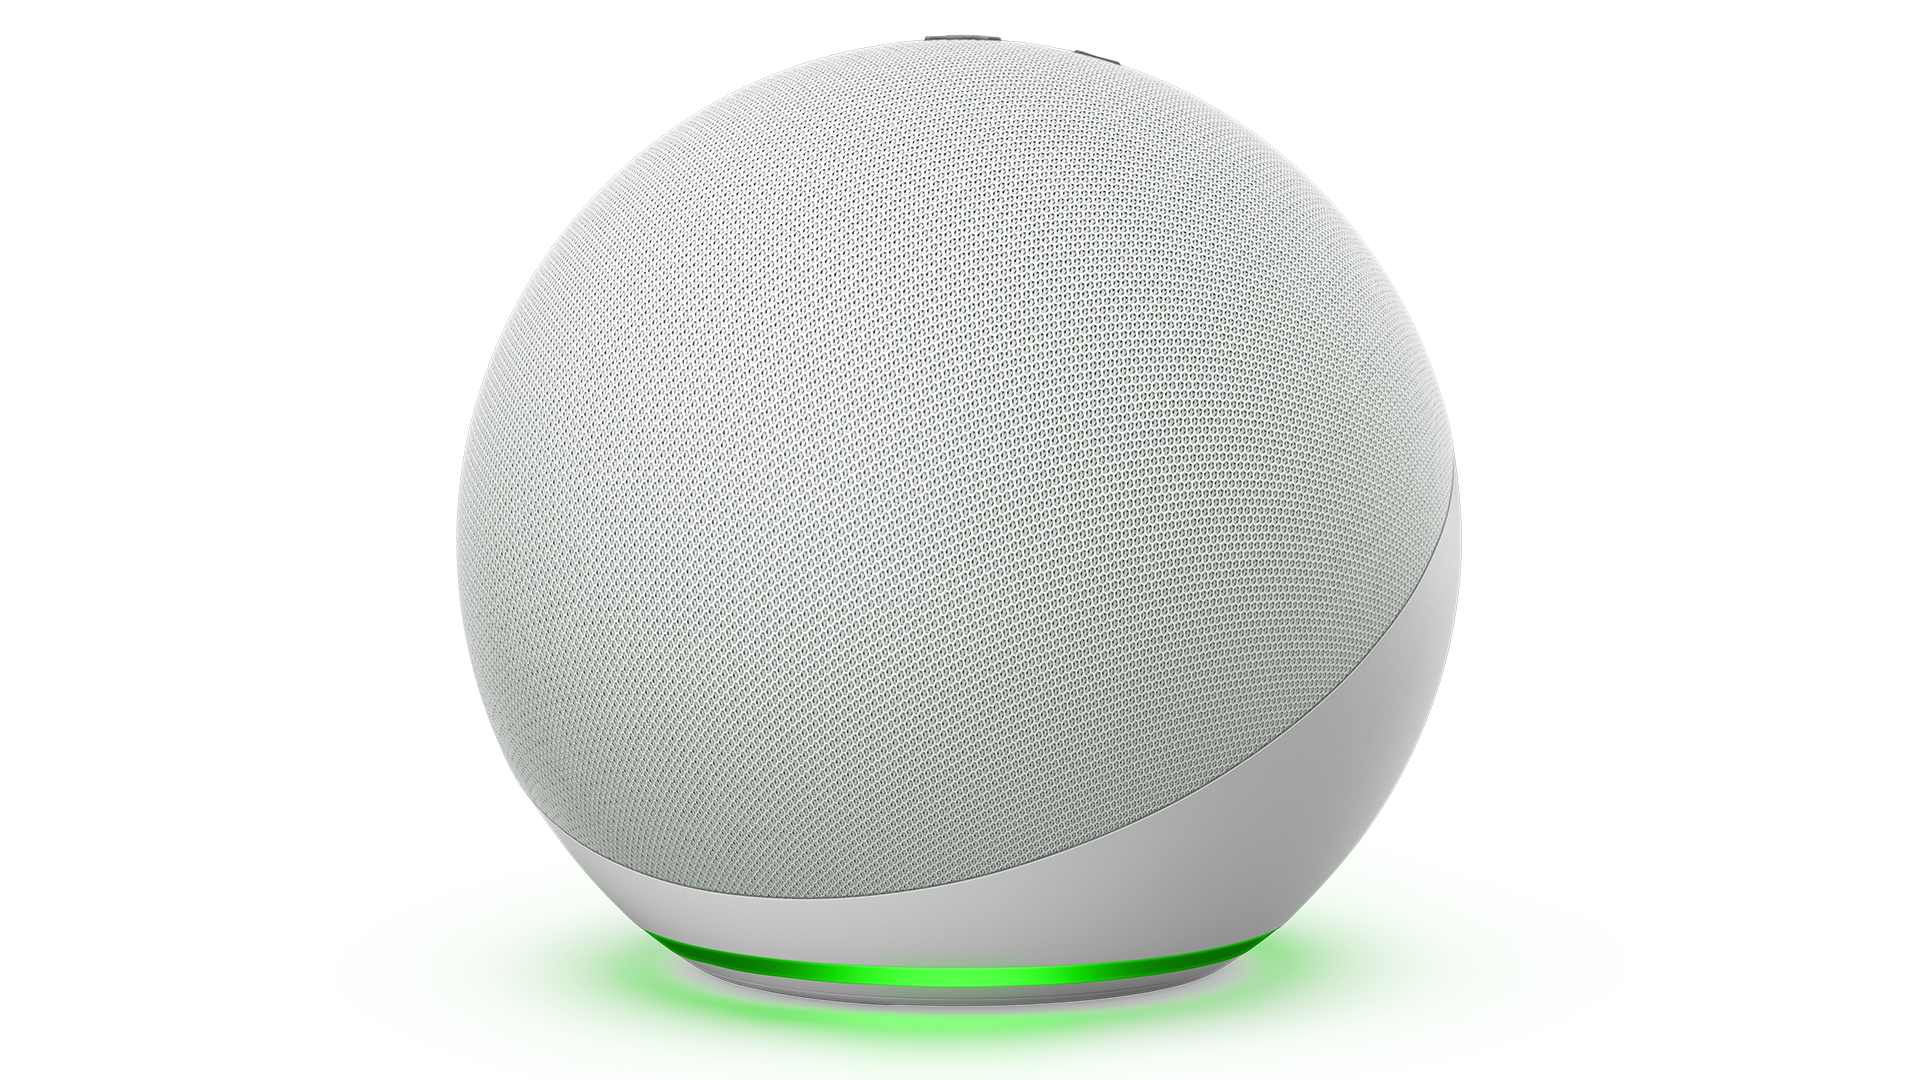 What does the green light on an  Echo speaker mean? And how